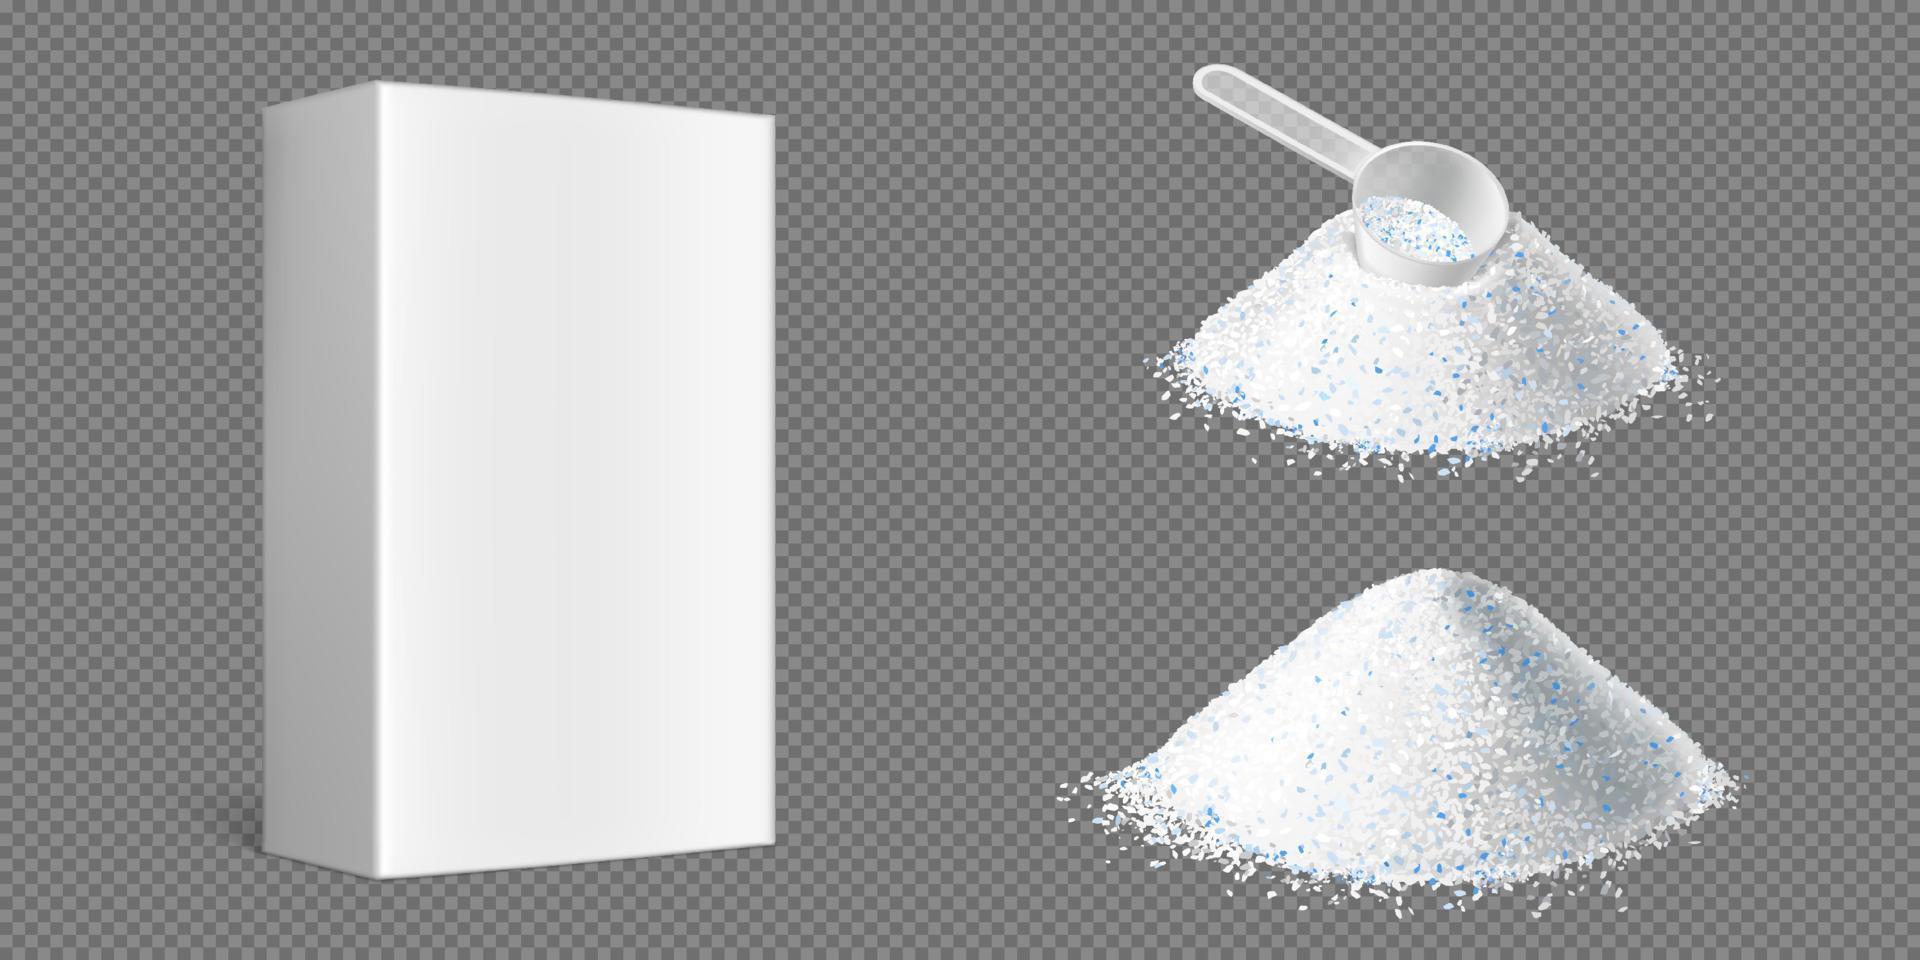 Washing powder piles with measuring scoop and box vector